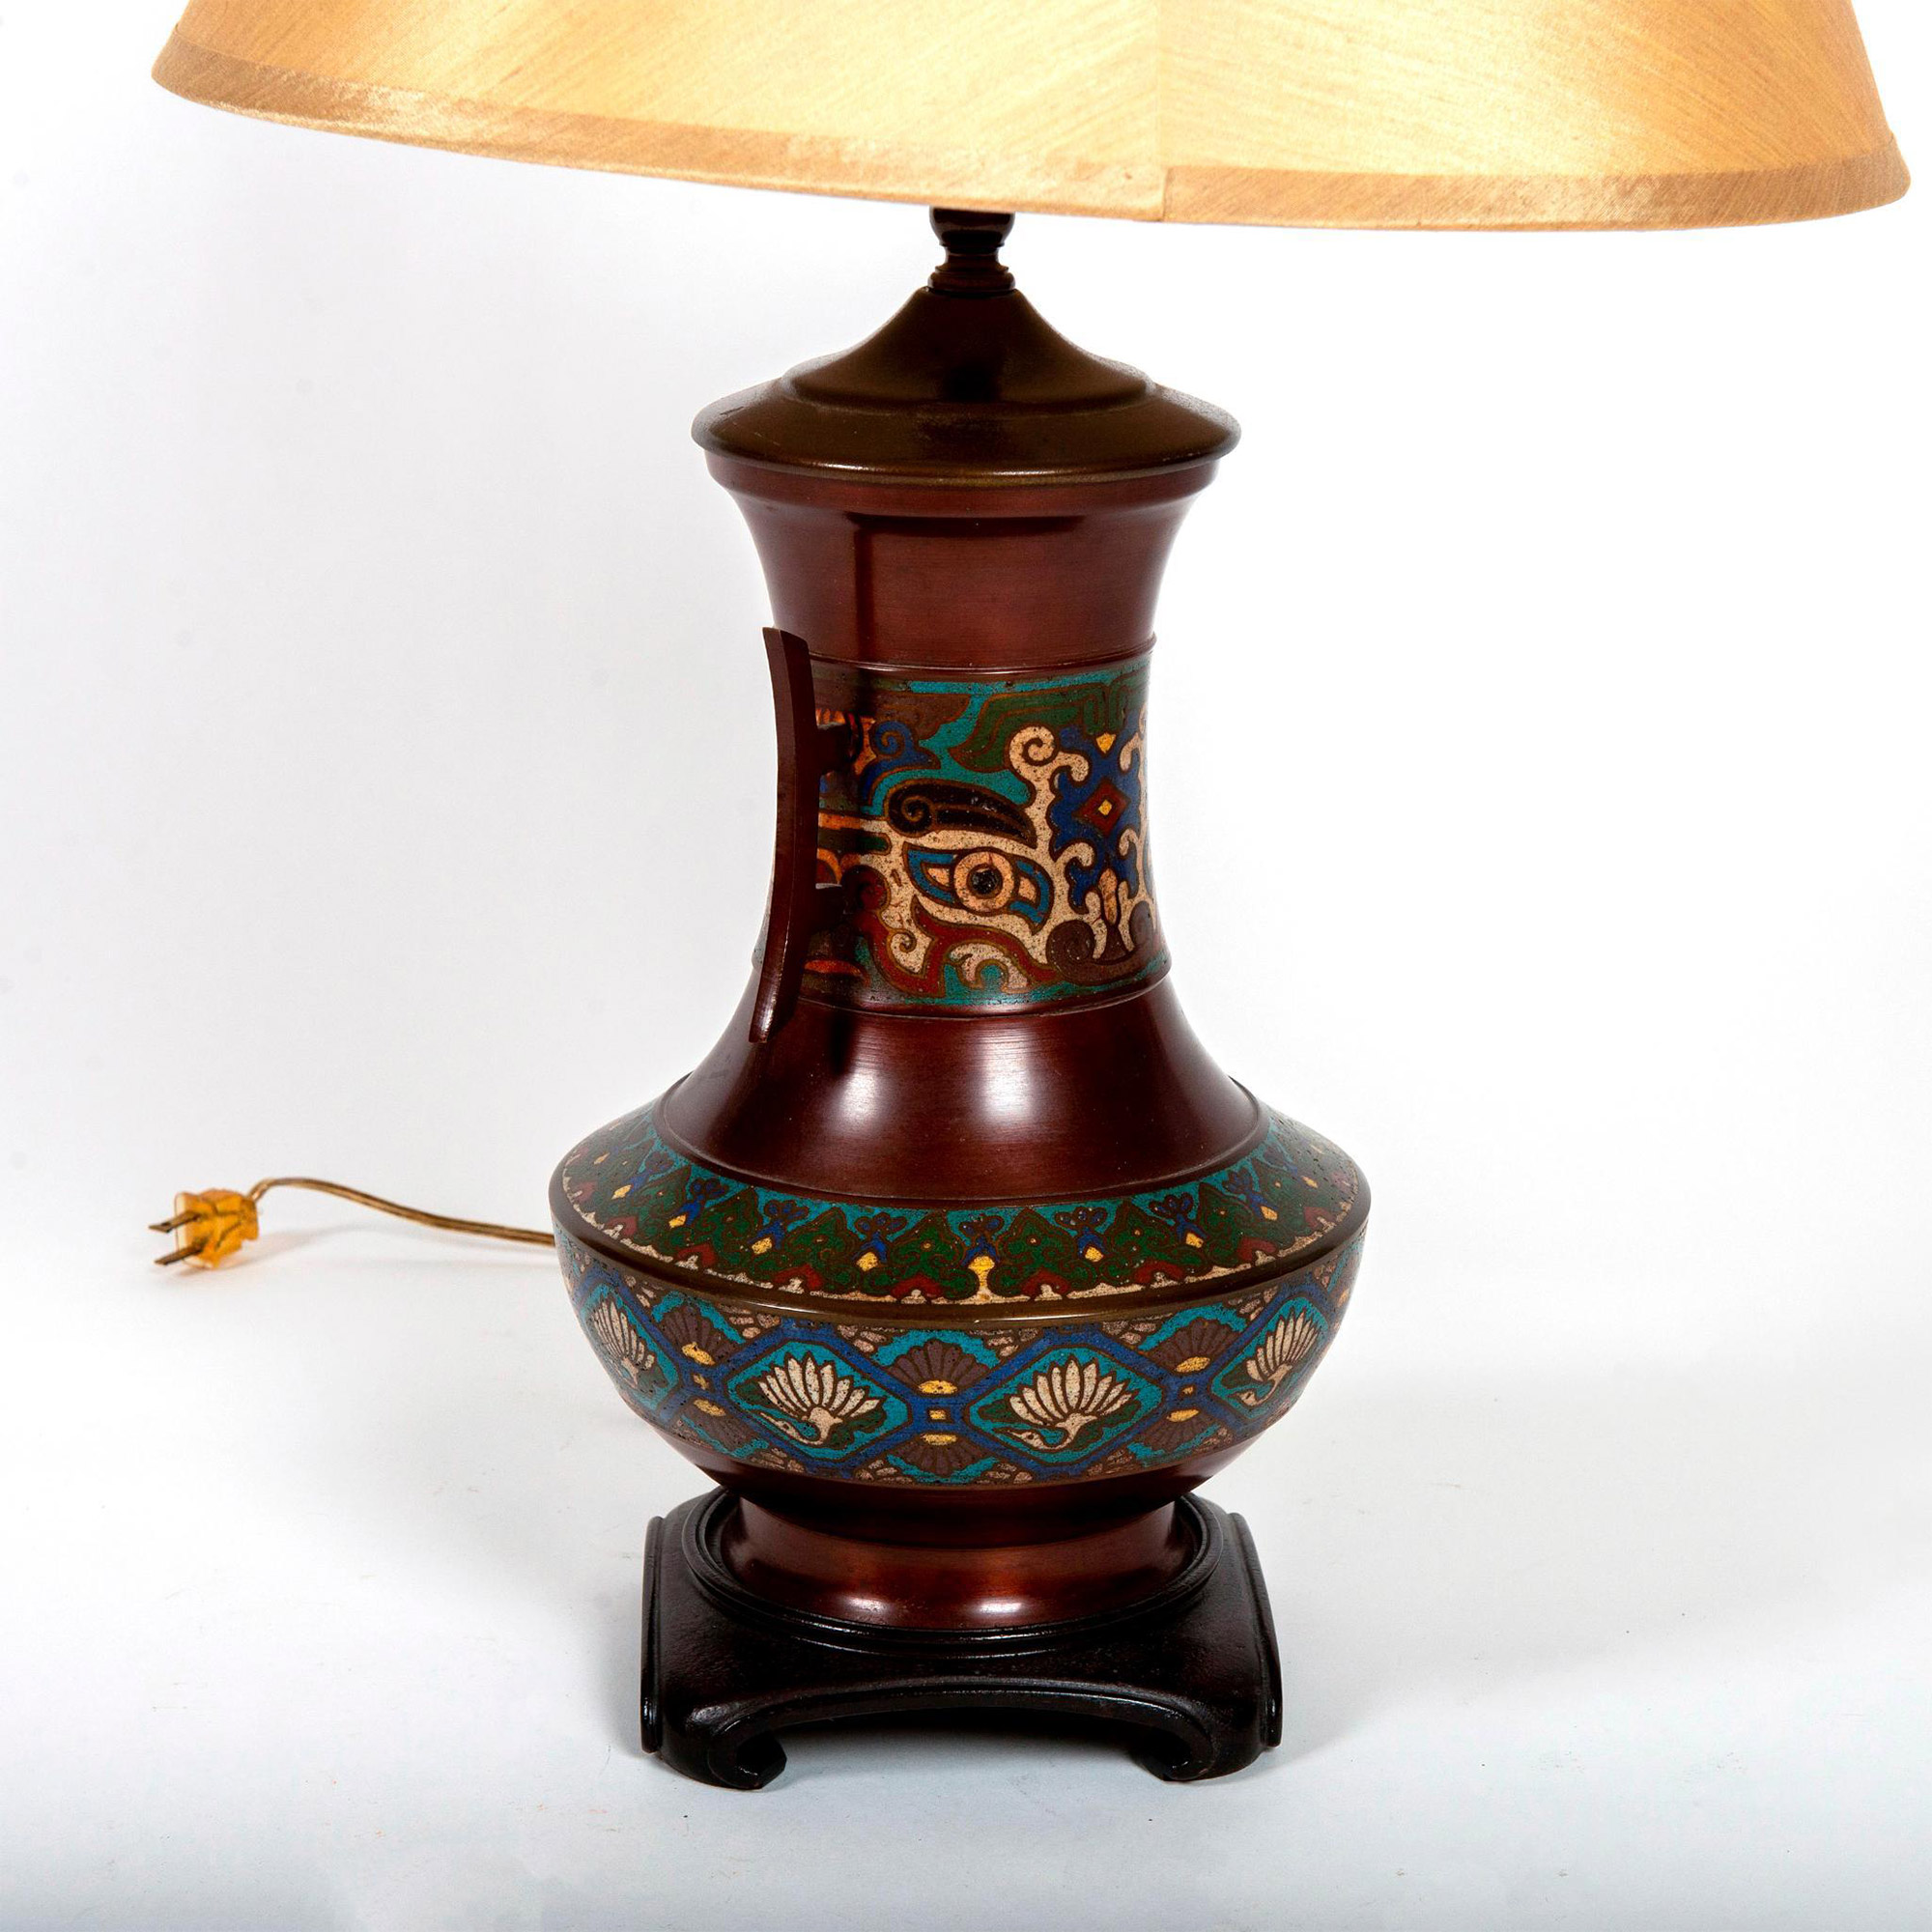 Vintage Chinese Cloisonne Table Lamp - Image 2 of 5